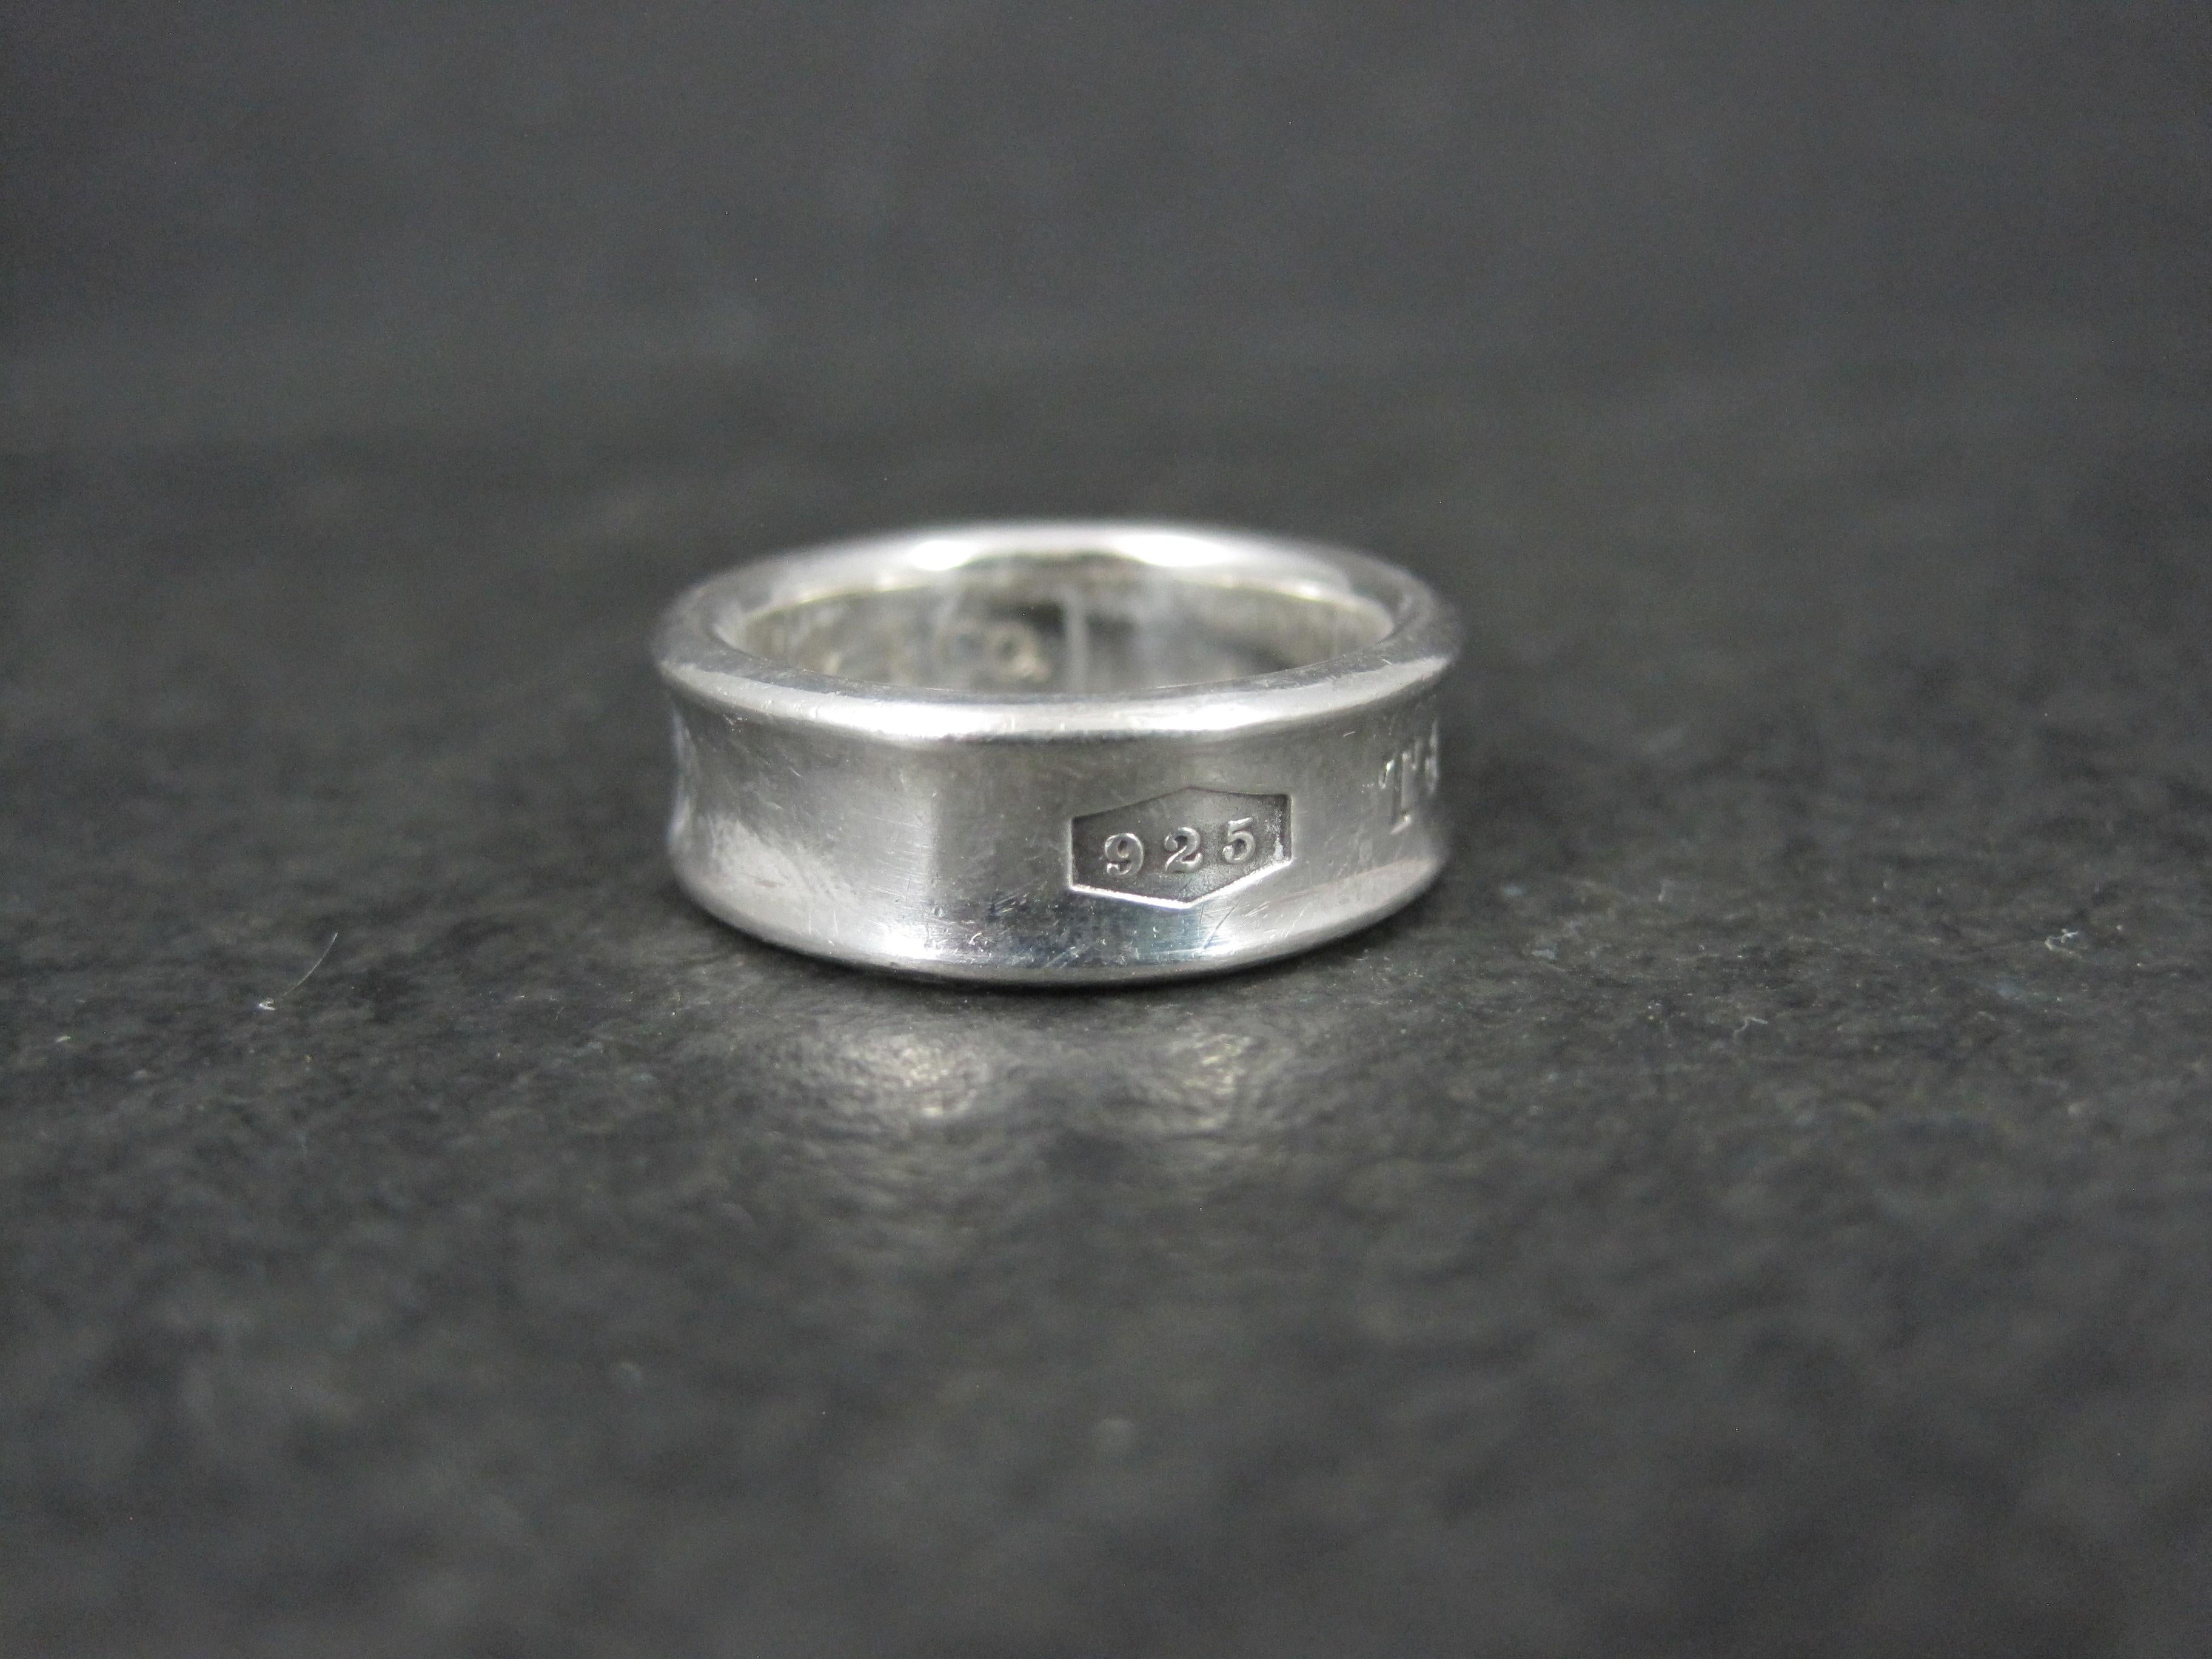 1997 Tiffany & Co 1837 Band Ring Sterling Silver Size 6.5 In Good Condition For Sale In Webster, SD